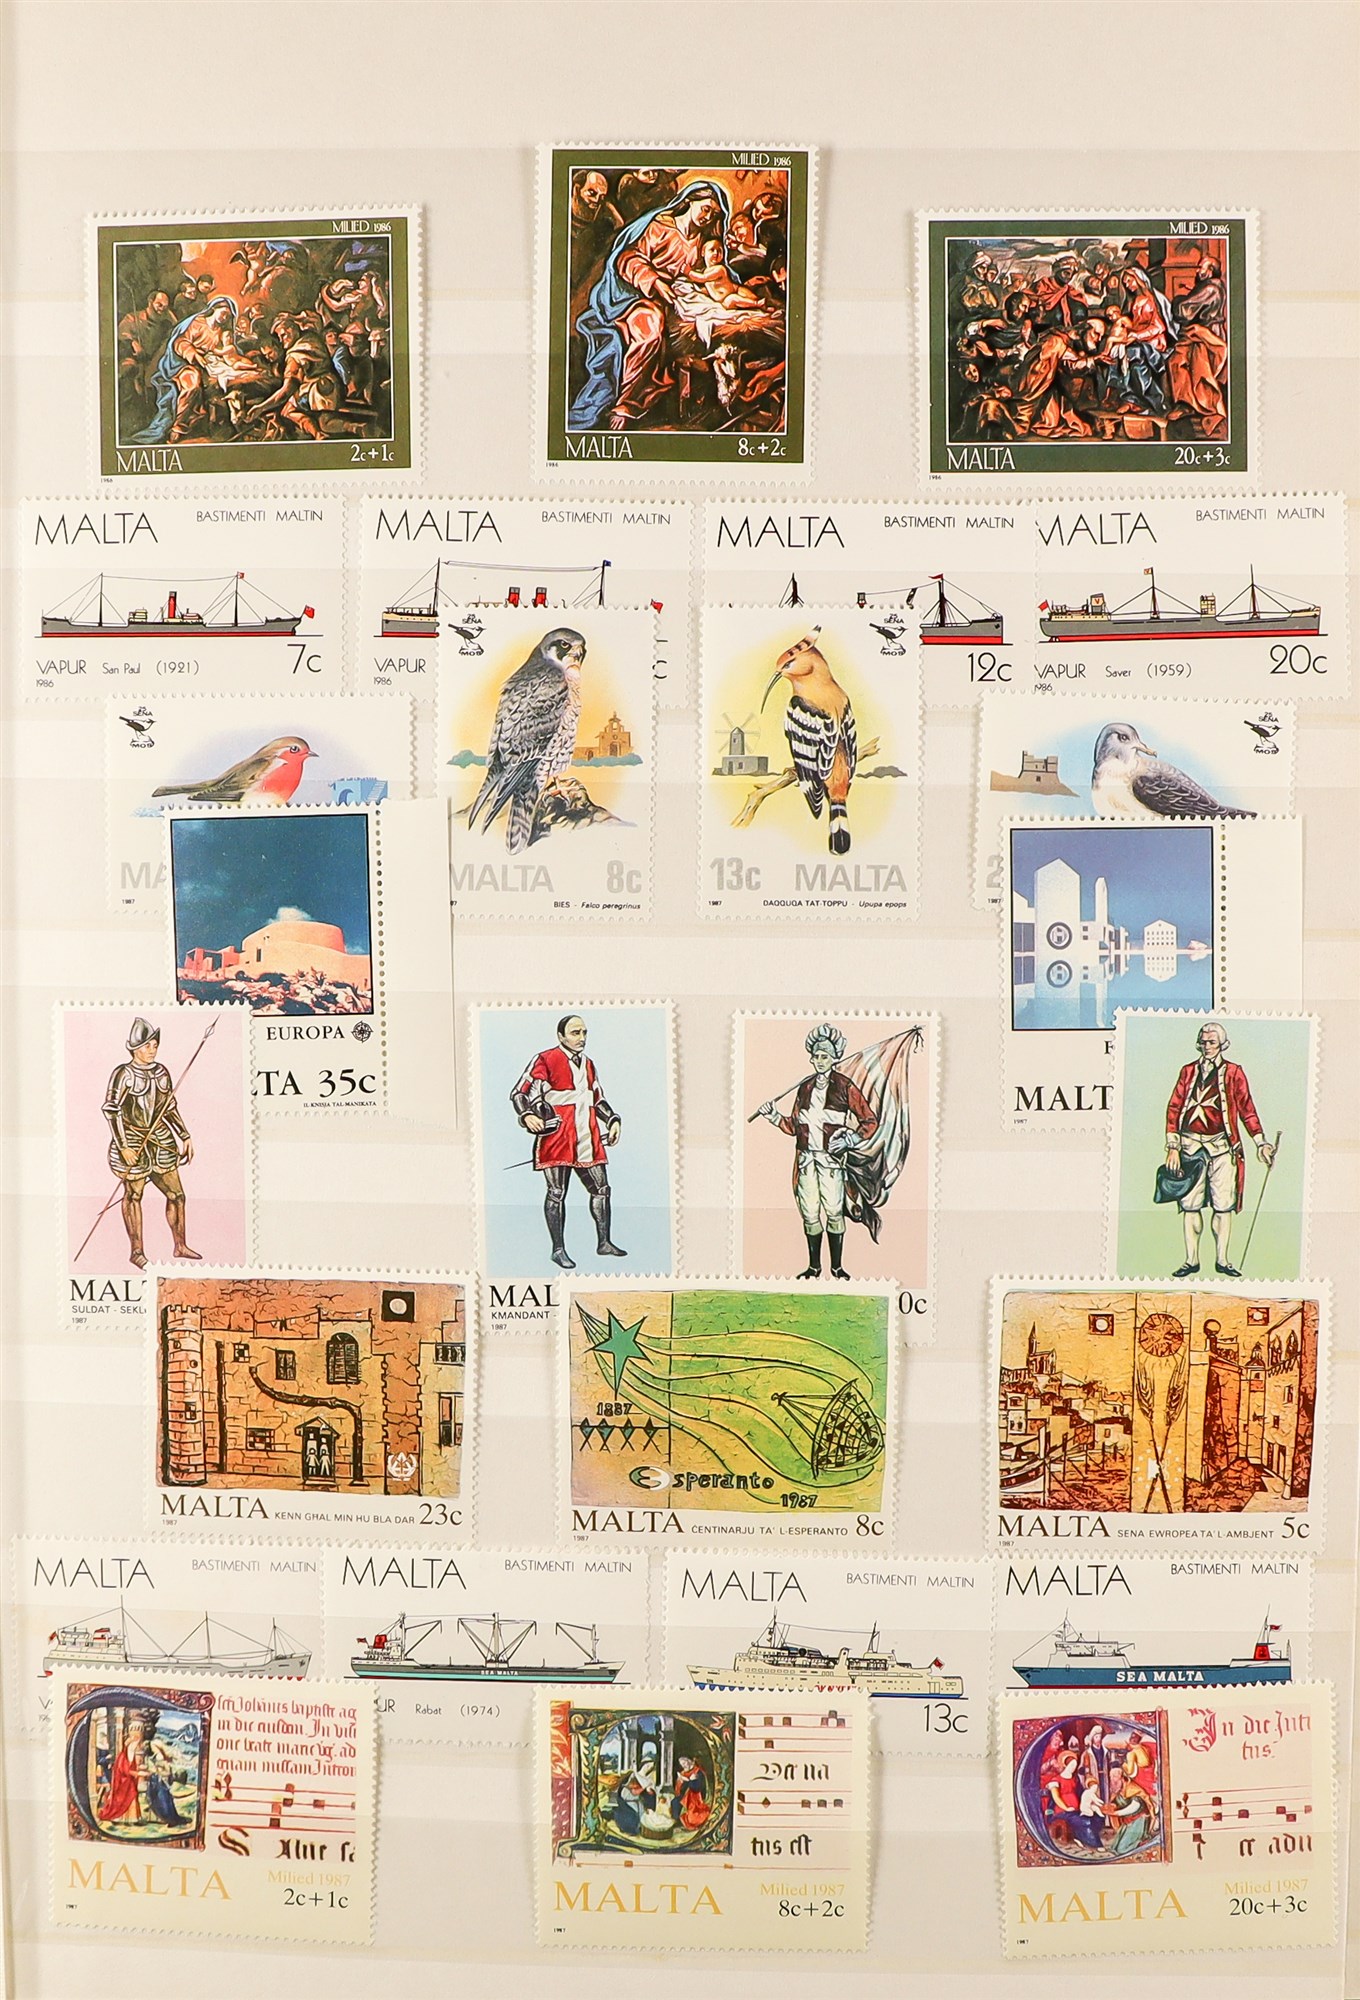 MALTA 1953 - 2013 NEVER HINGED MINT collection in 2 albums, appears complete for sets, miniature - Image 8 of 21